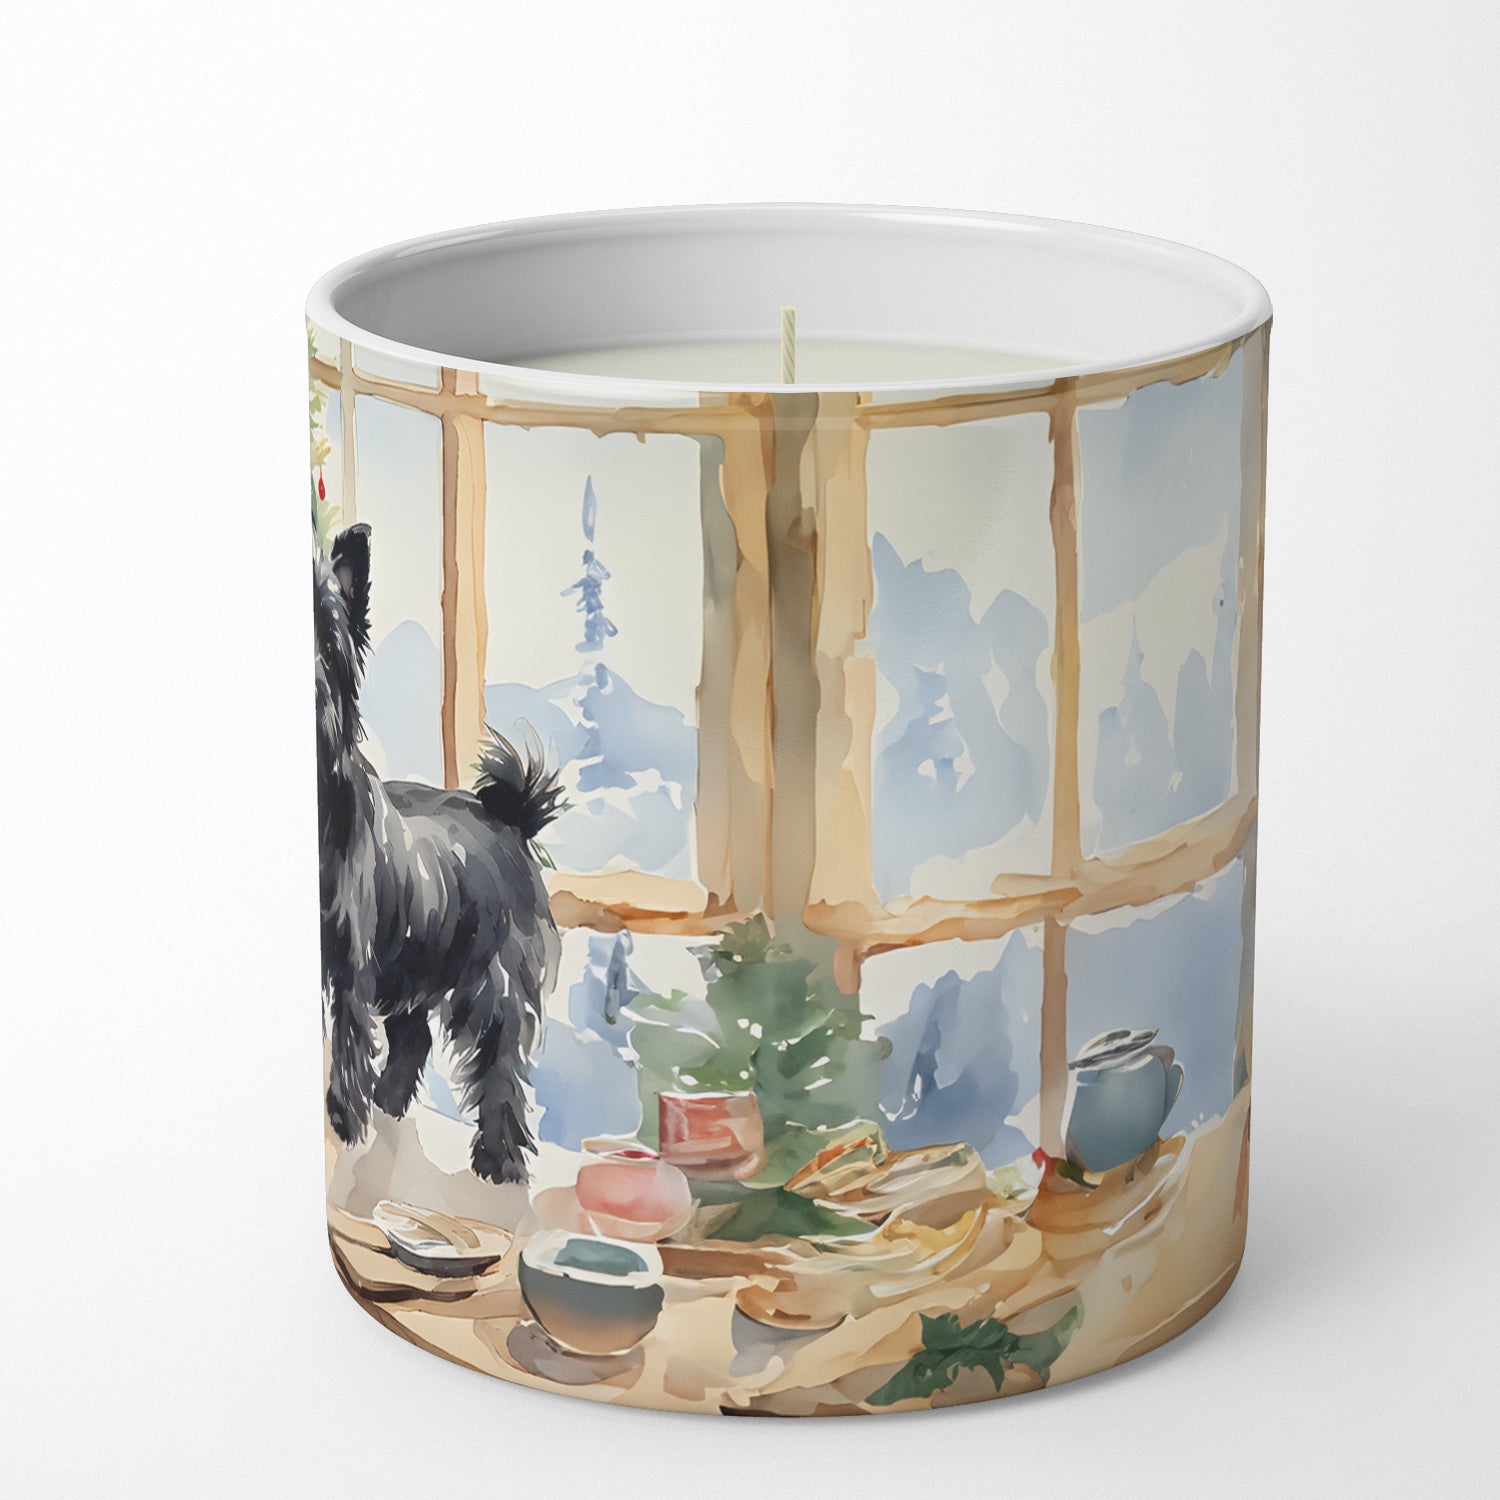 Cairn Terrier Christmas Cookies Decorative Soy Candle